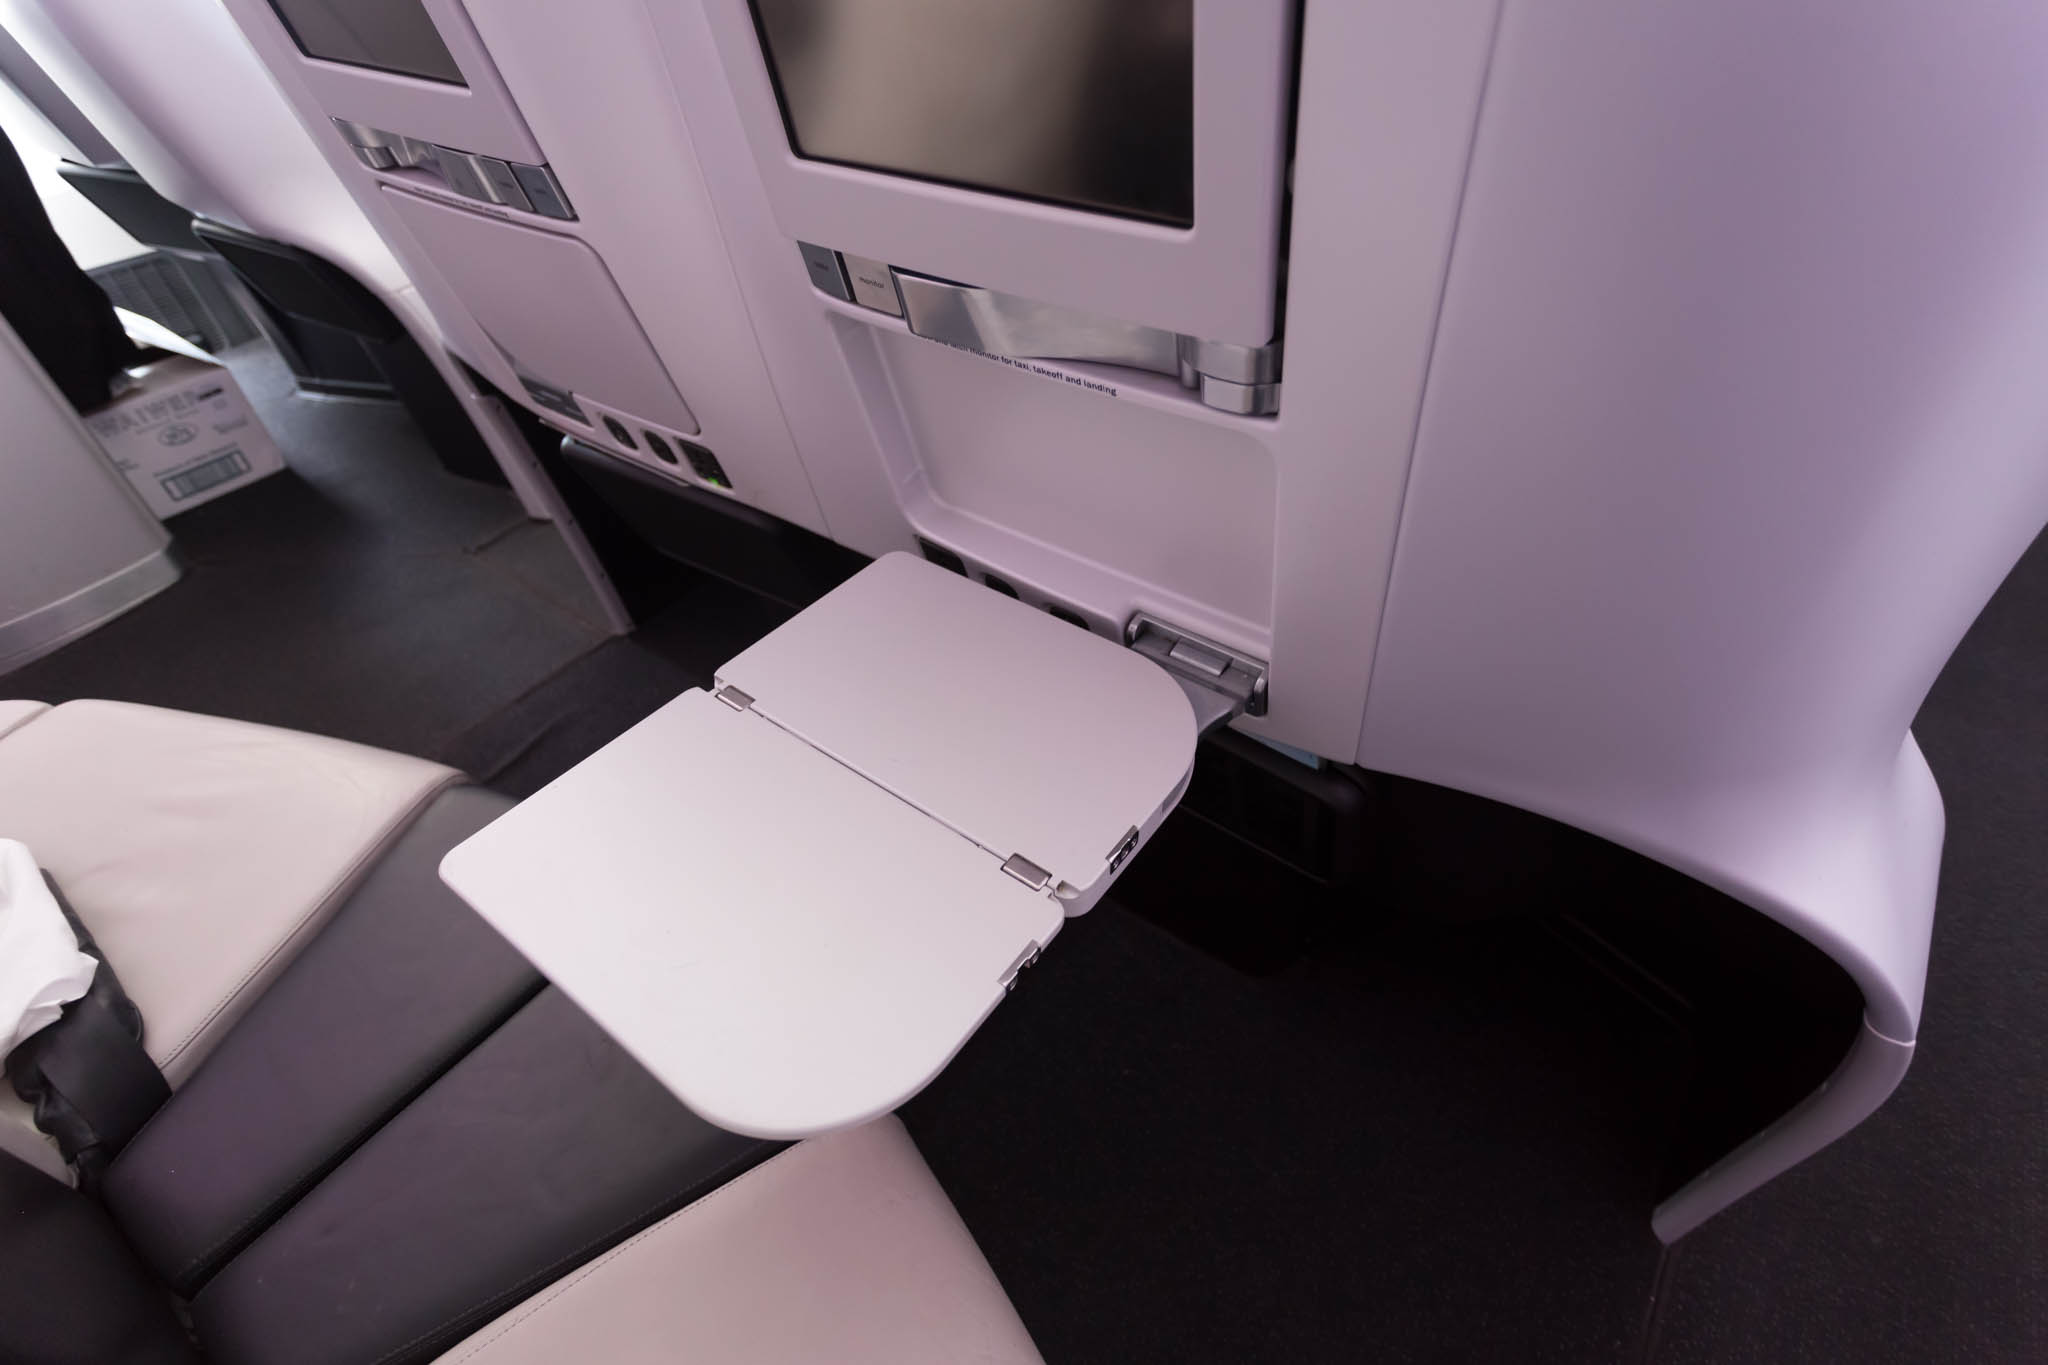 a seat on a seat in an airplane